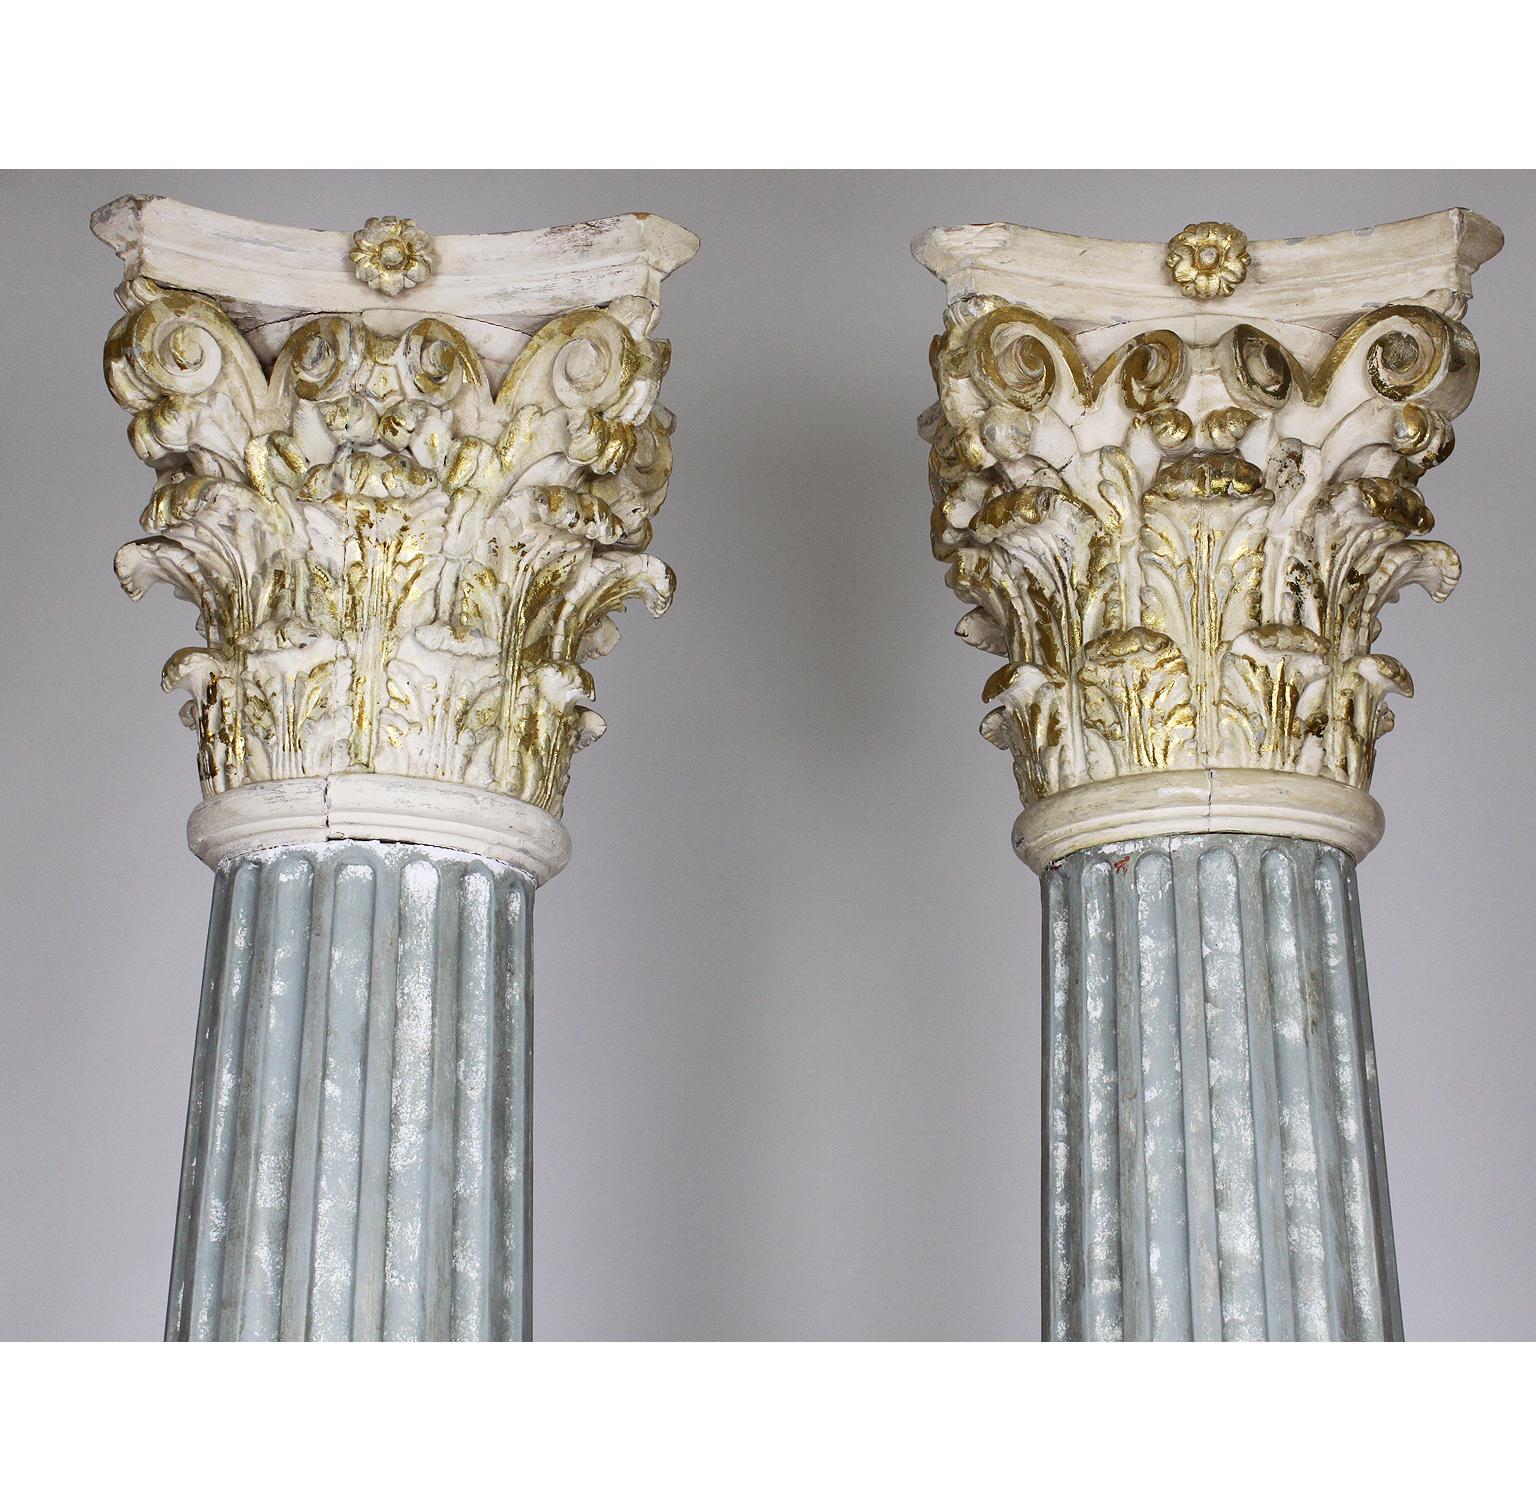 A large pair of Greco-Roman style carved wood and gesso carved faux-marble and parcel-gilt architectural Corinthian columns. The slender carved walnut column resting on a square plinth and crowned with a white and parcel-gilt carved cast gesso